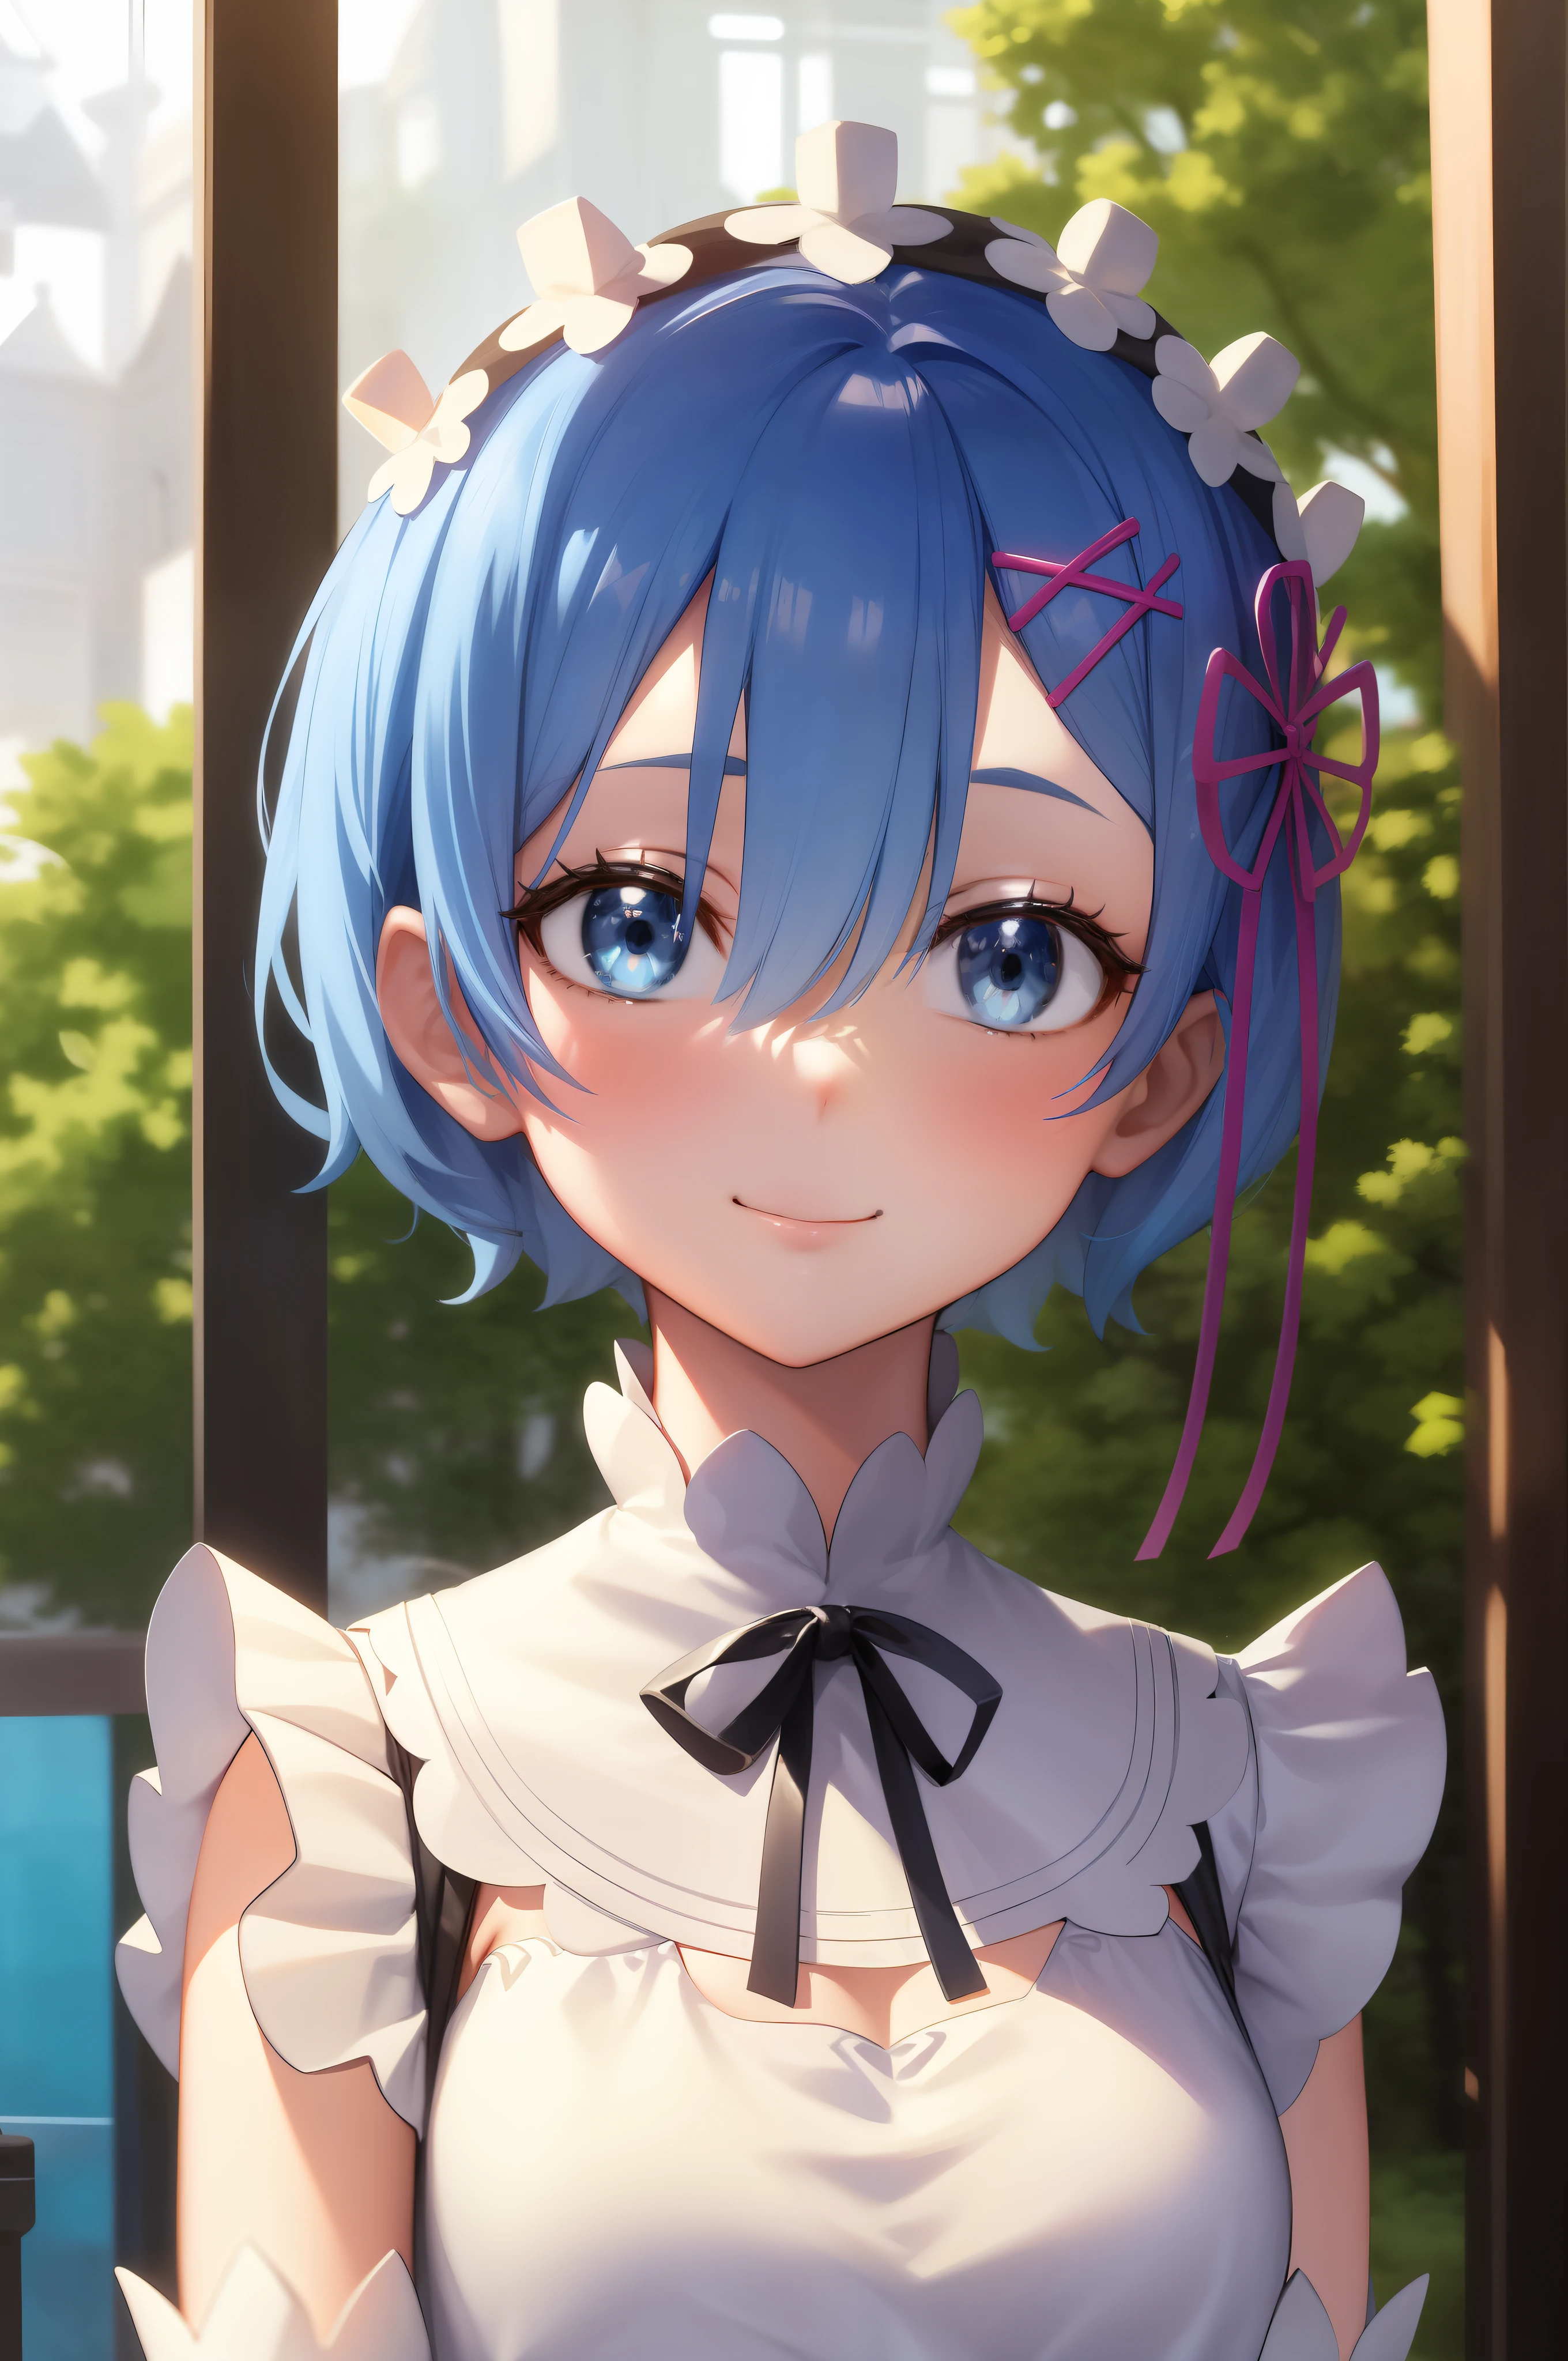 Anime girl with blue hair and white dress standing in front of window, Rem Rezero, short blue haired woman, anime visual of a cute girl, anime moe art style, Today's featured anime stills, style of anime4 K, Also, Girl with blue hair, , , 8K, close up of a young anime girl，ssmile